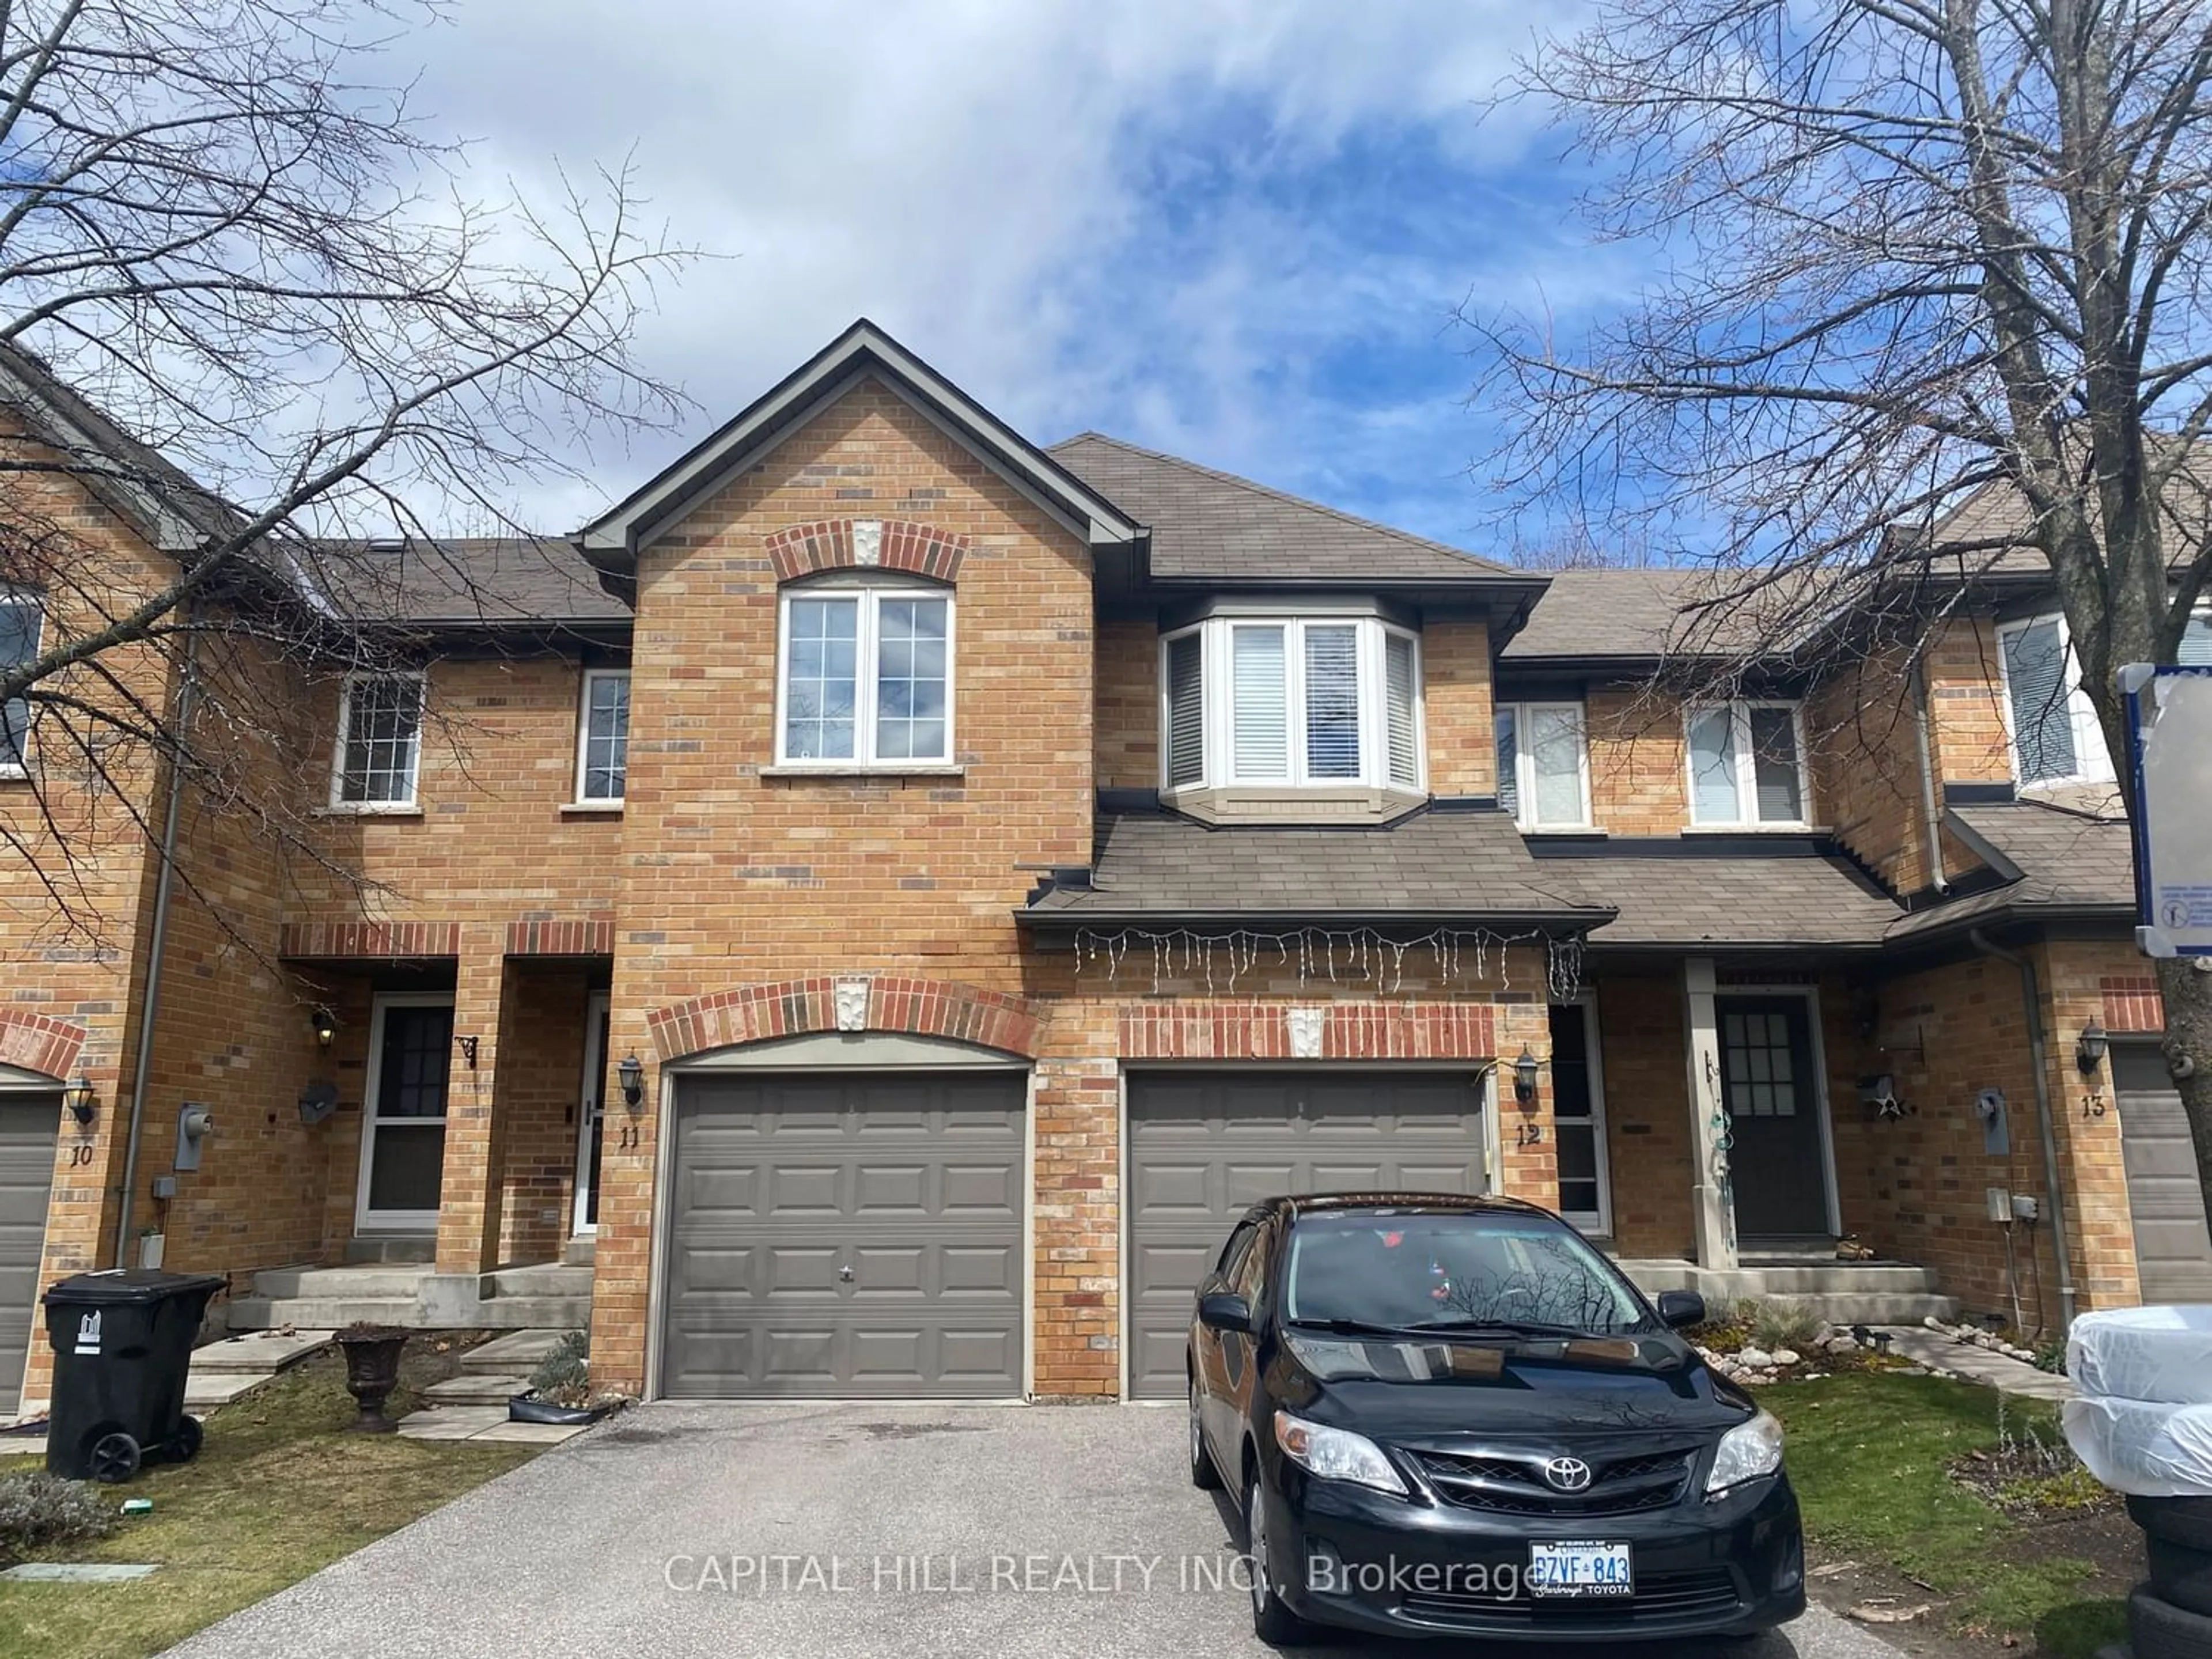 Home with brick exterior material for 6400 Lawrence Ave #12, Toronto Ontario M1C 5C7